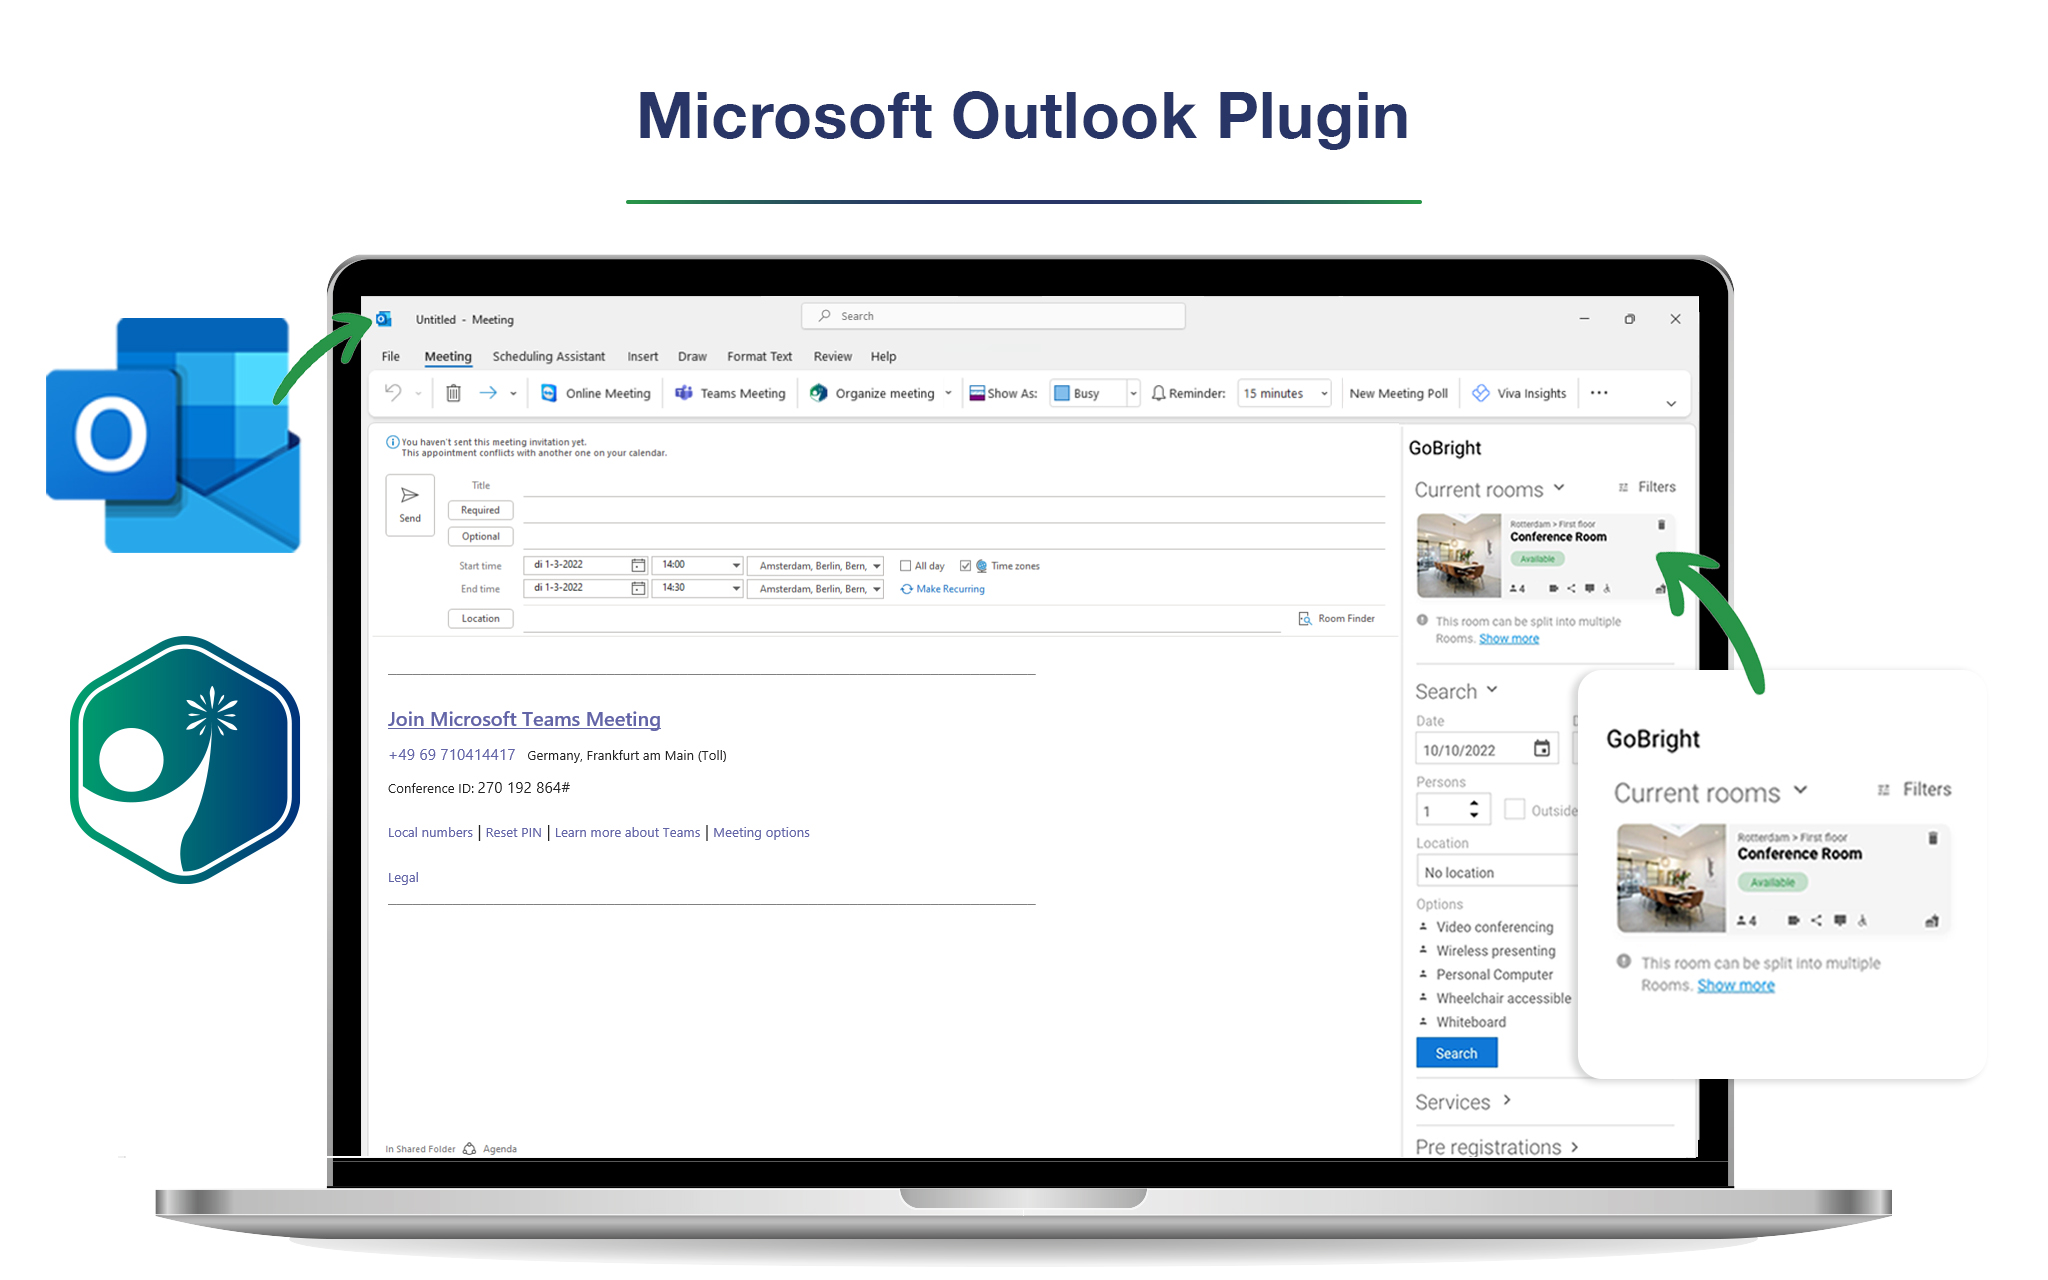 GoBright Outlook Plug-in